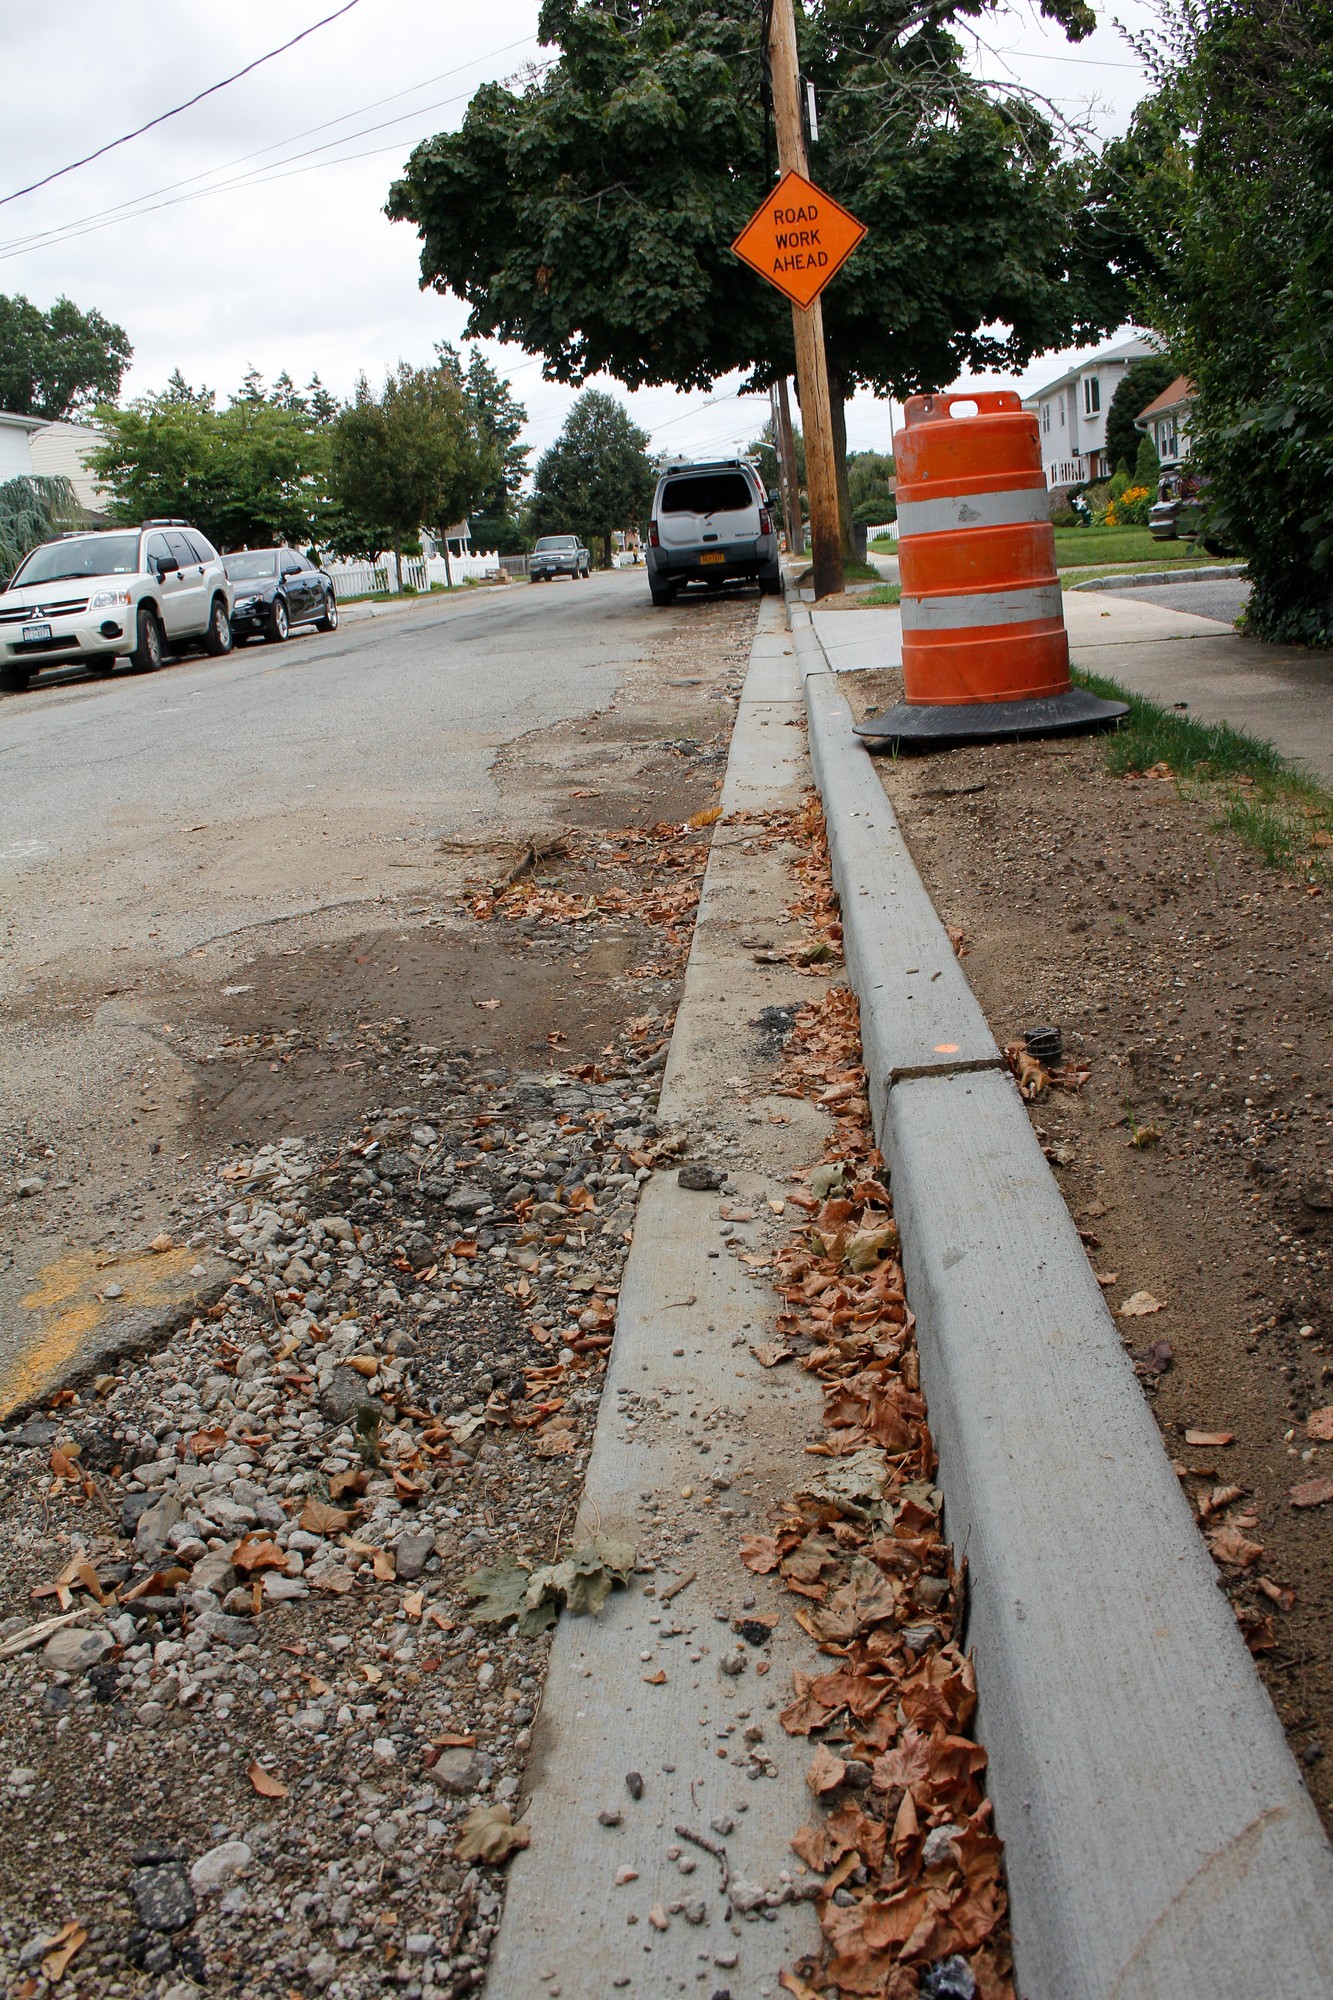 New curbs will be installed as part of the road improvement project.